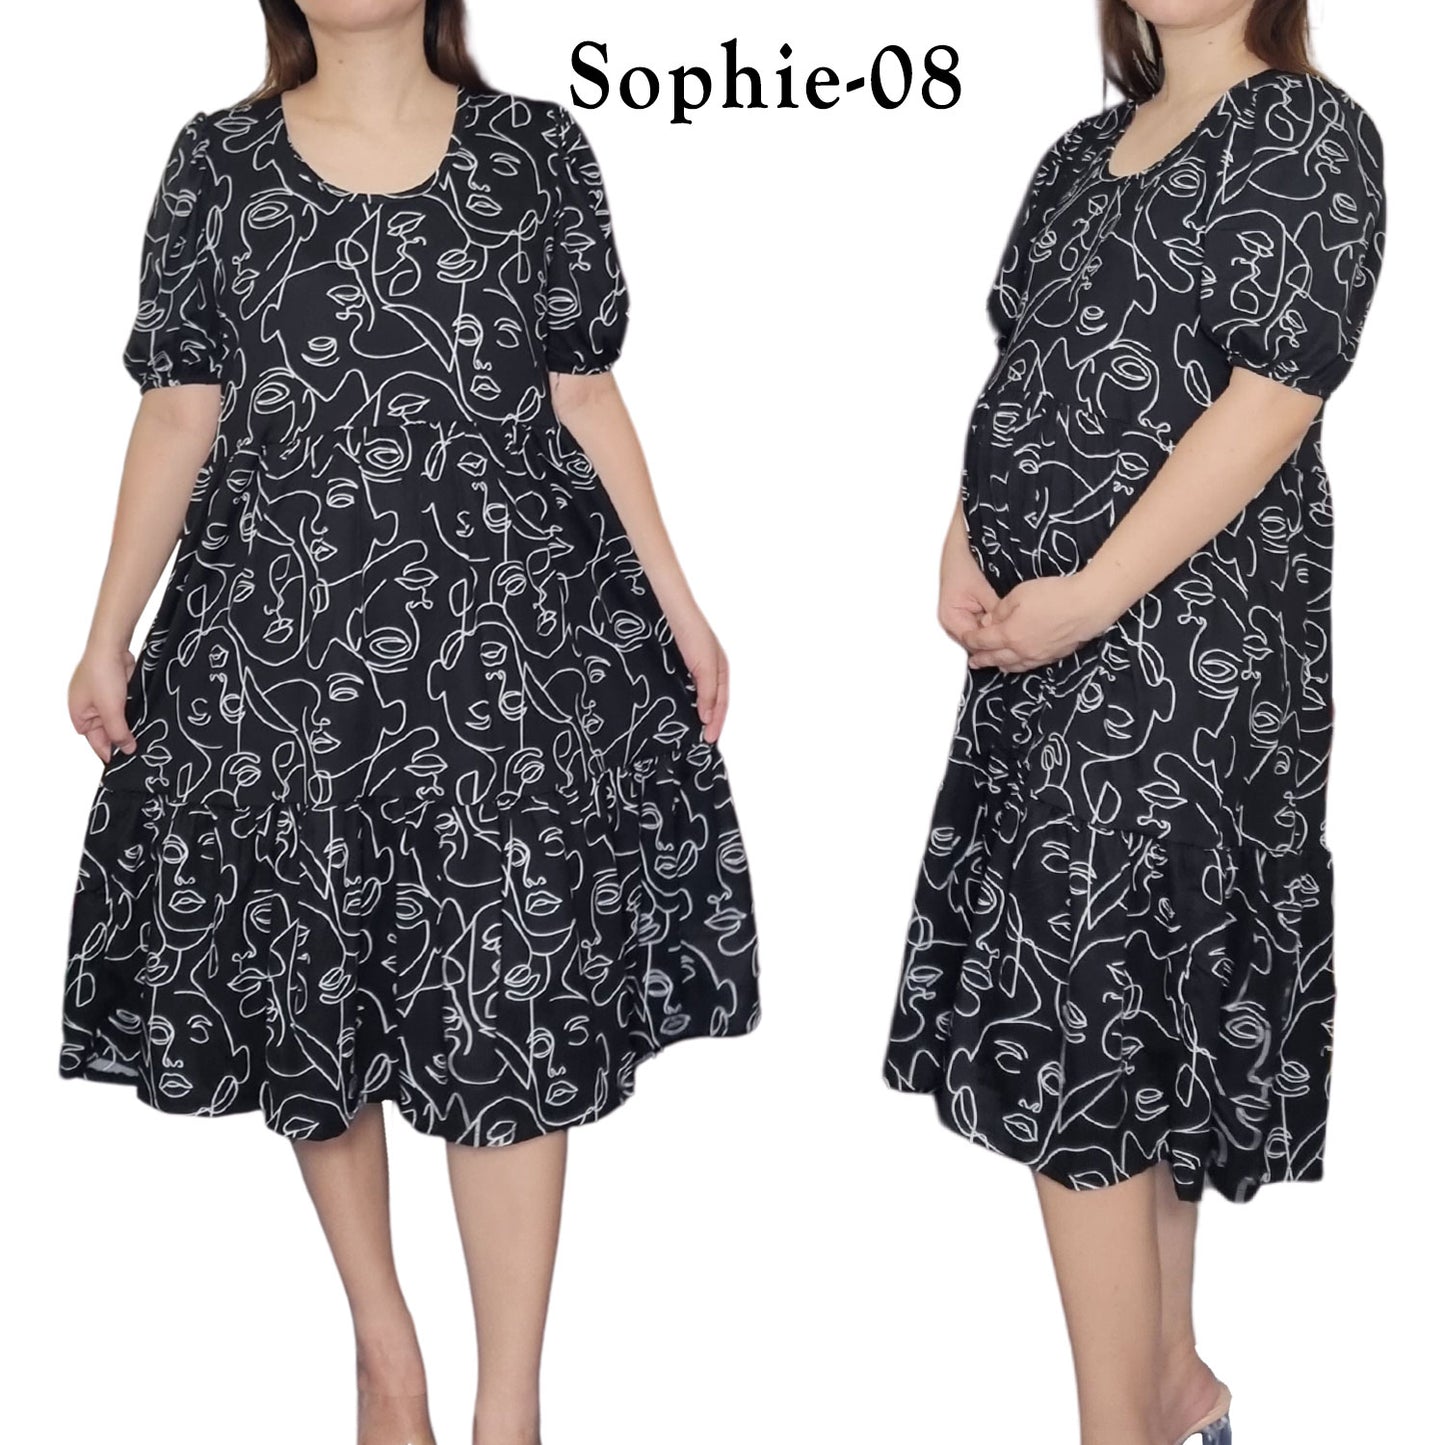 Sophie Dress for Ladies, Pregnant Women and Plus Size - Fits up to XL